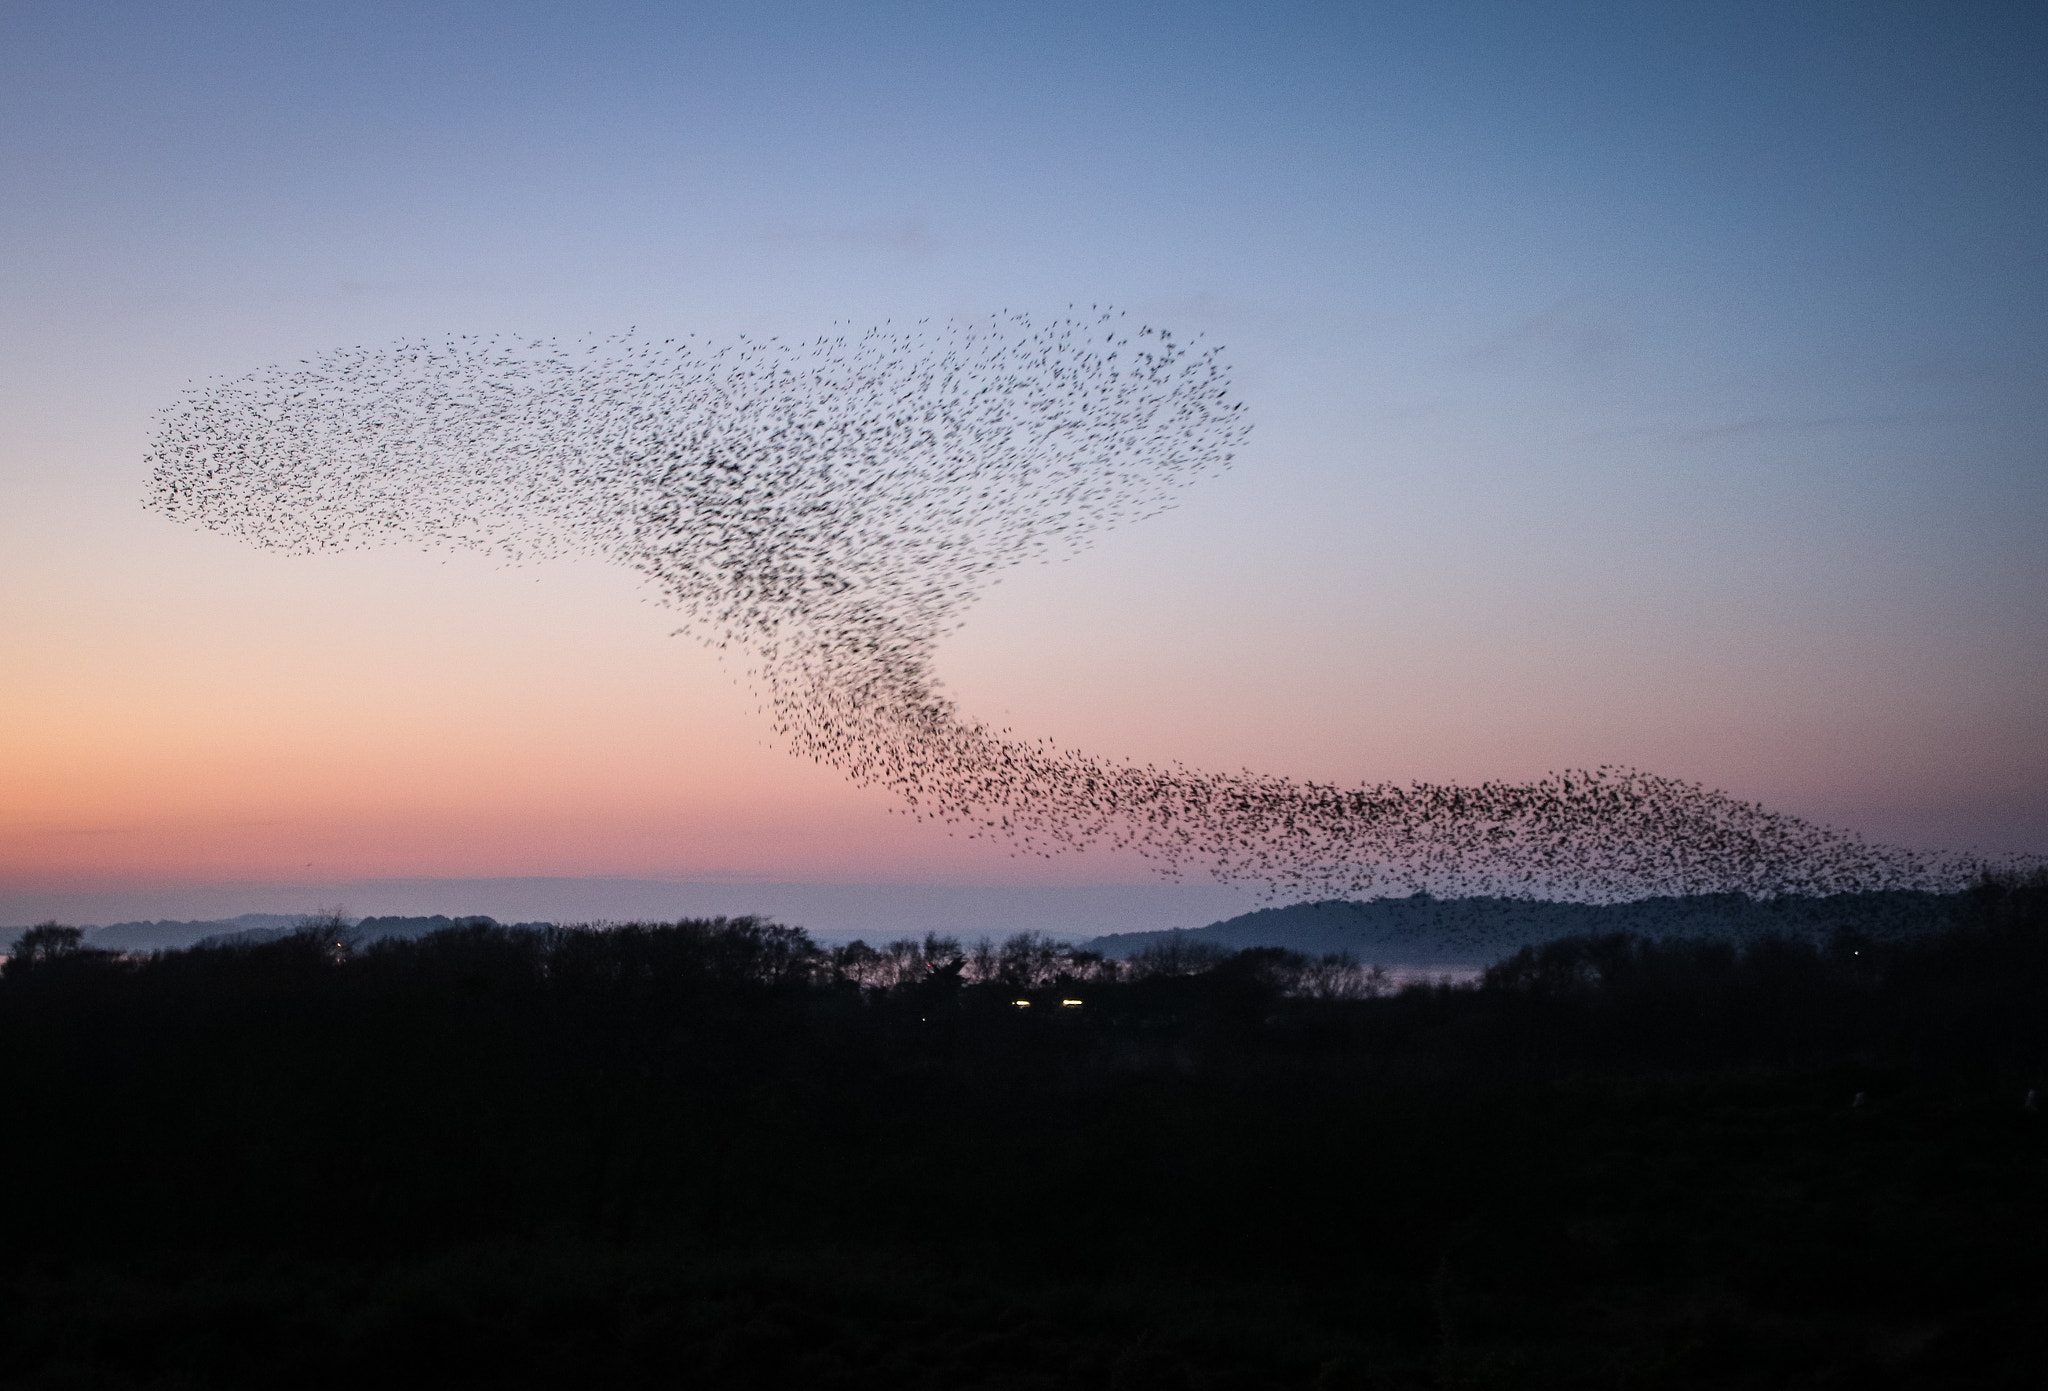 a swarm of starlings in the sky